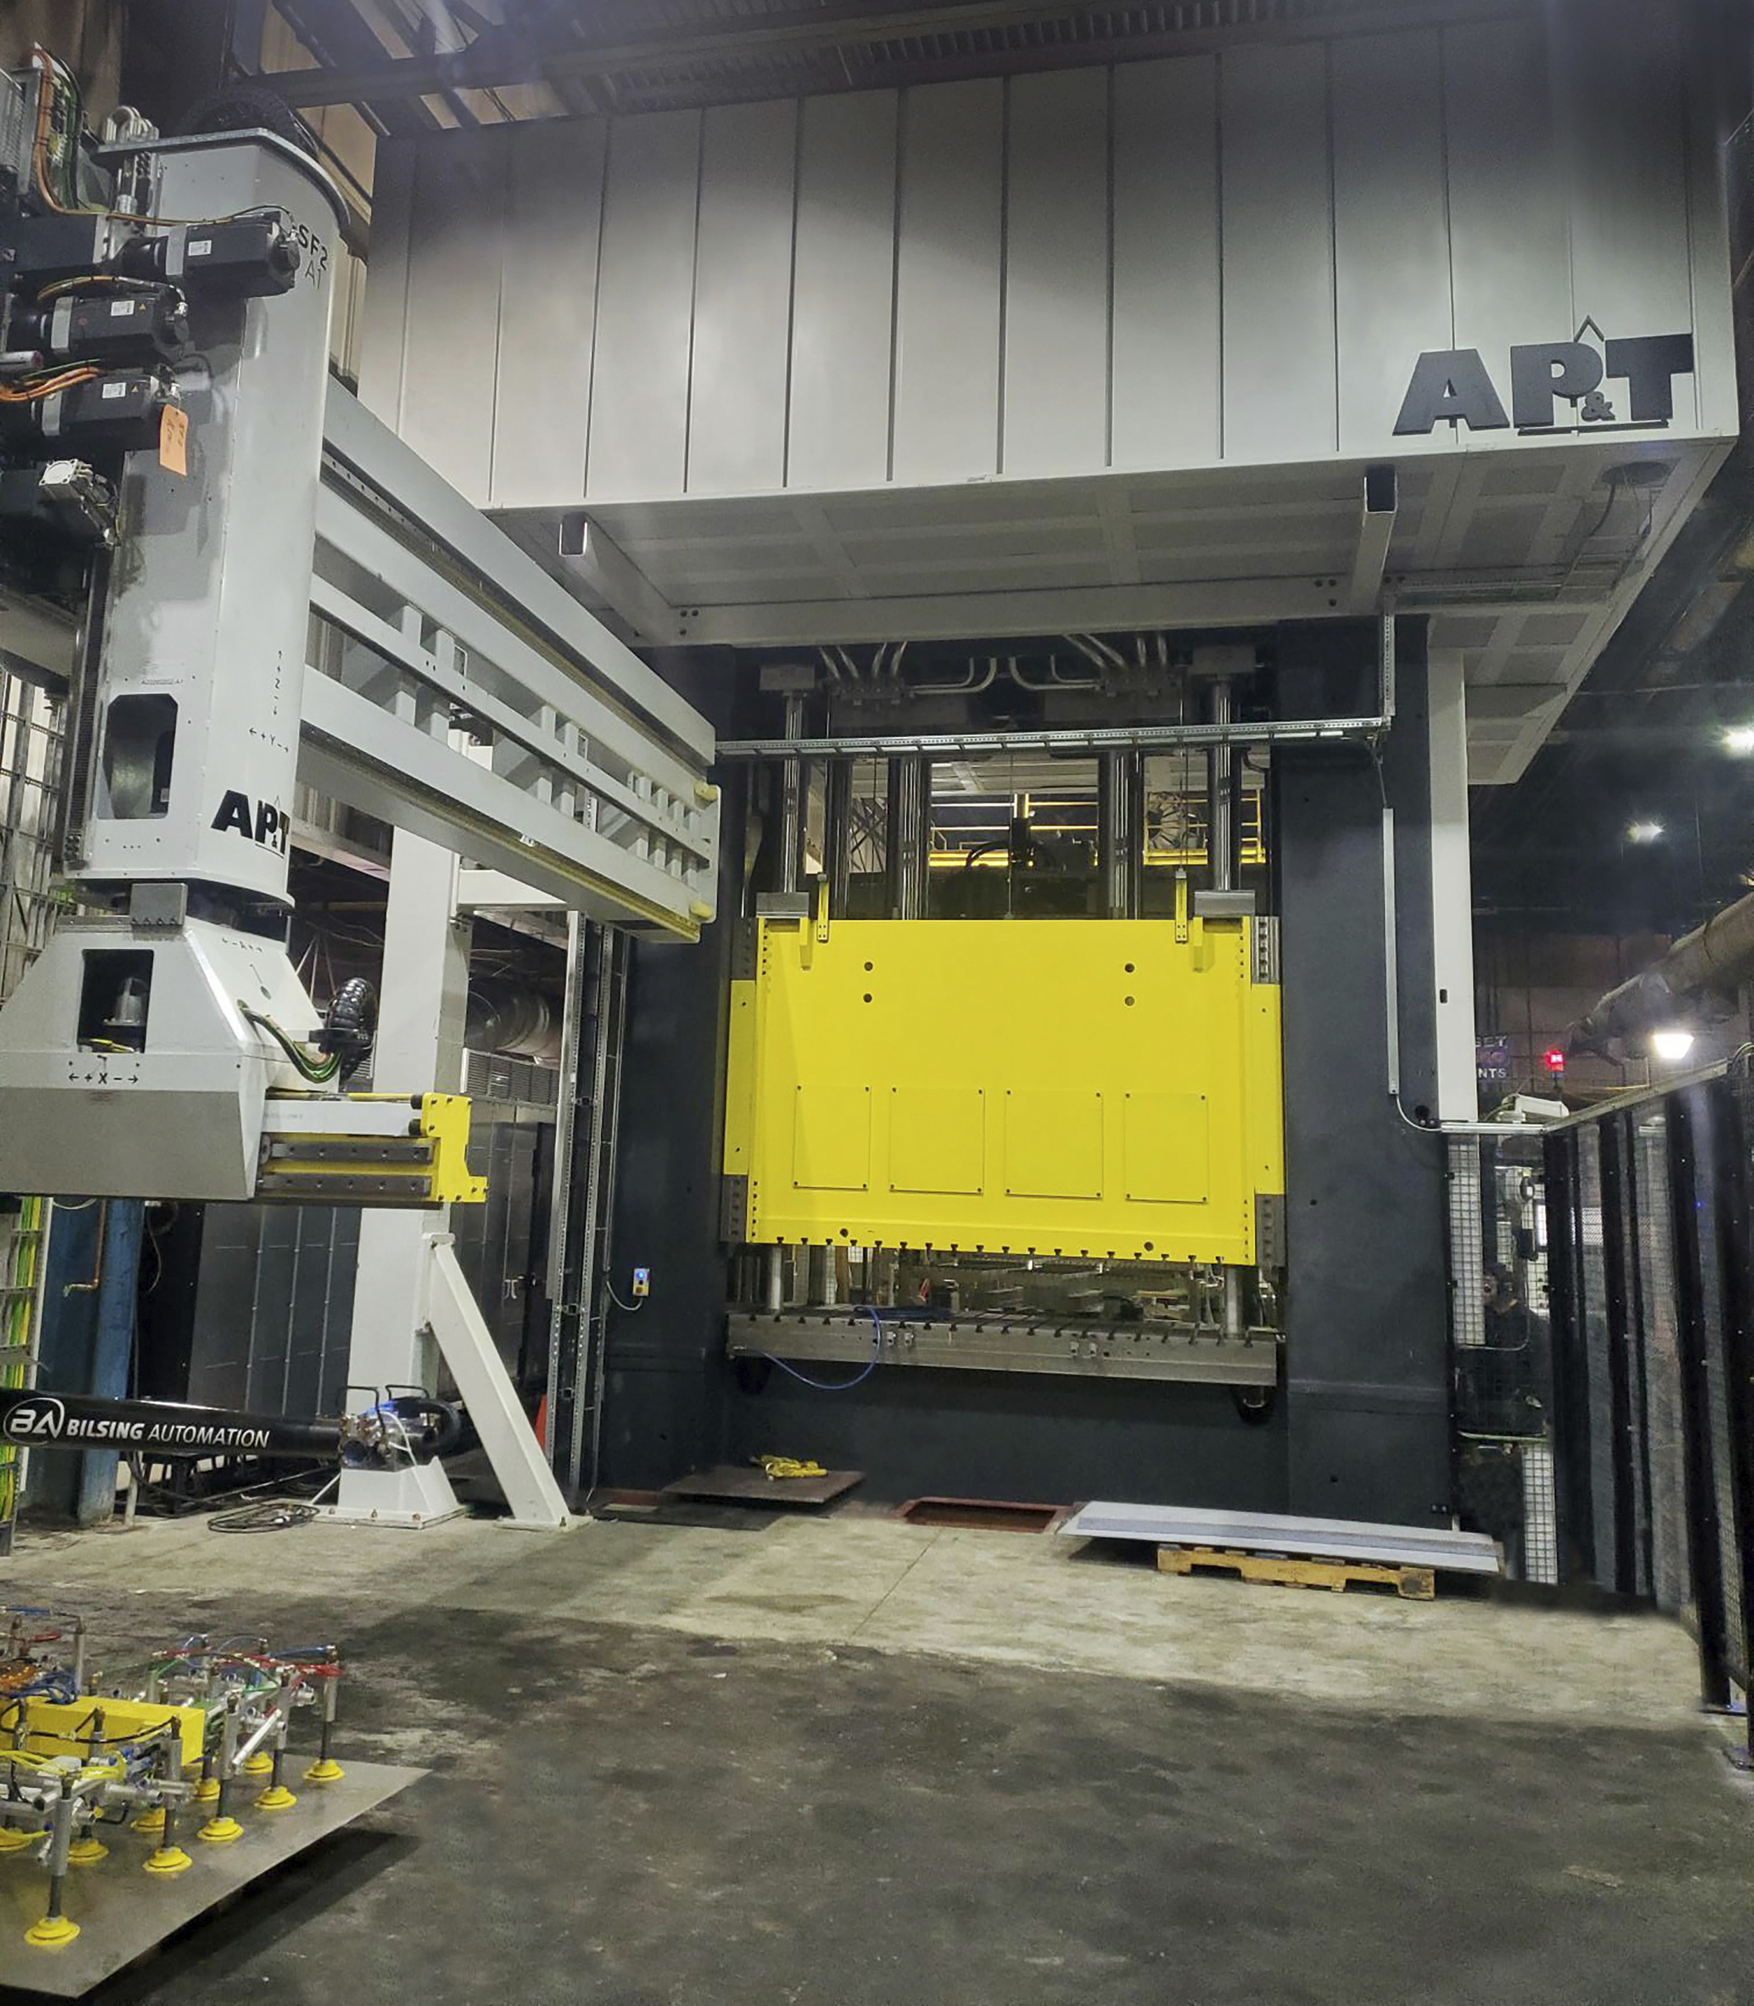 The servo-hydraulic press is 70 percent more energy efficient than a conventional hydraulic press from AP&T. © Bobcat